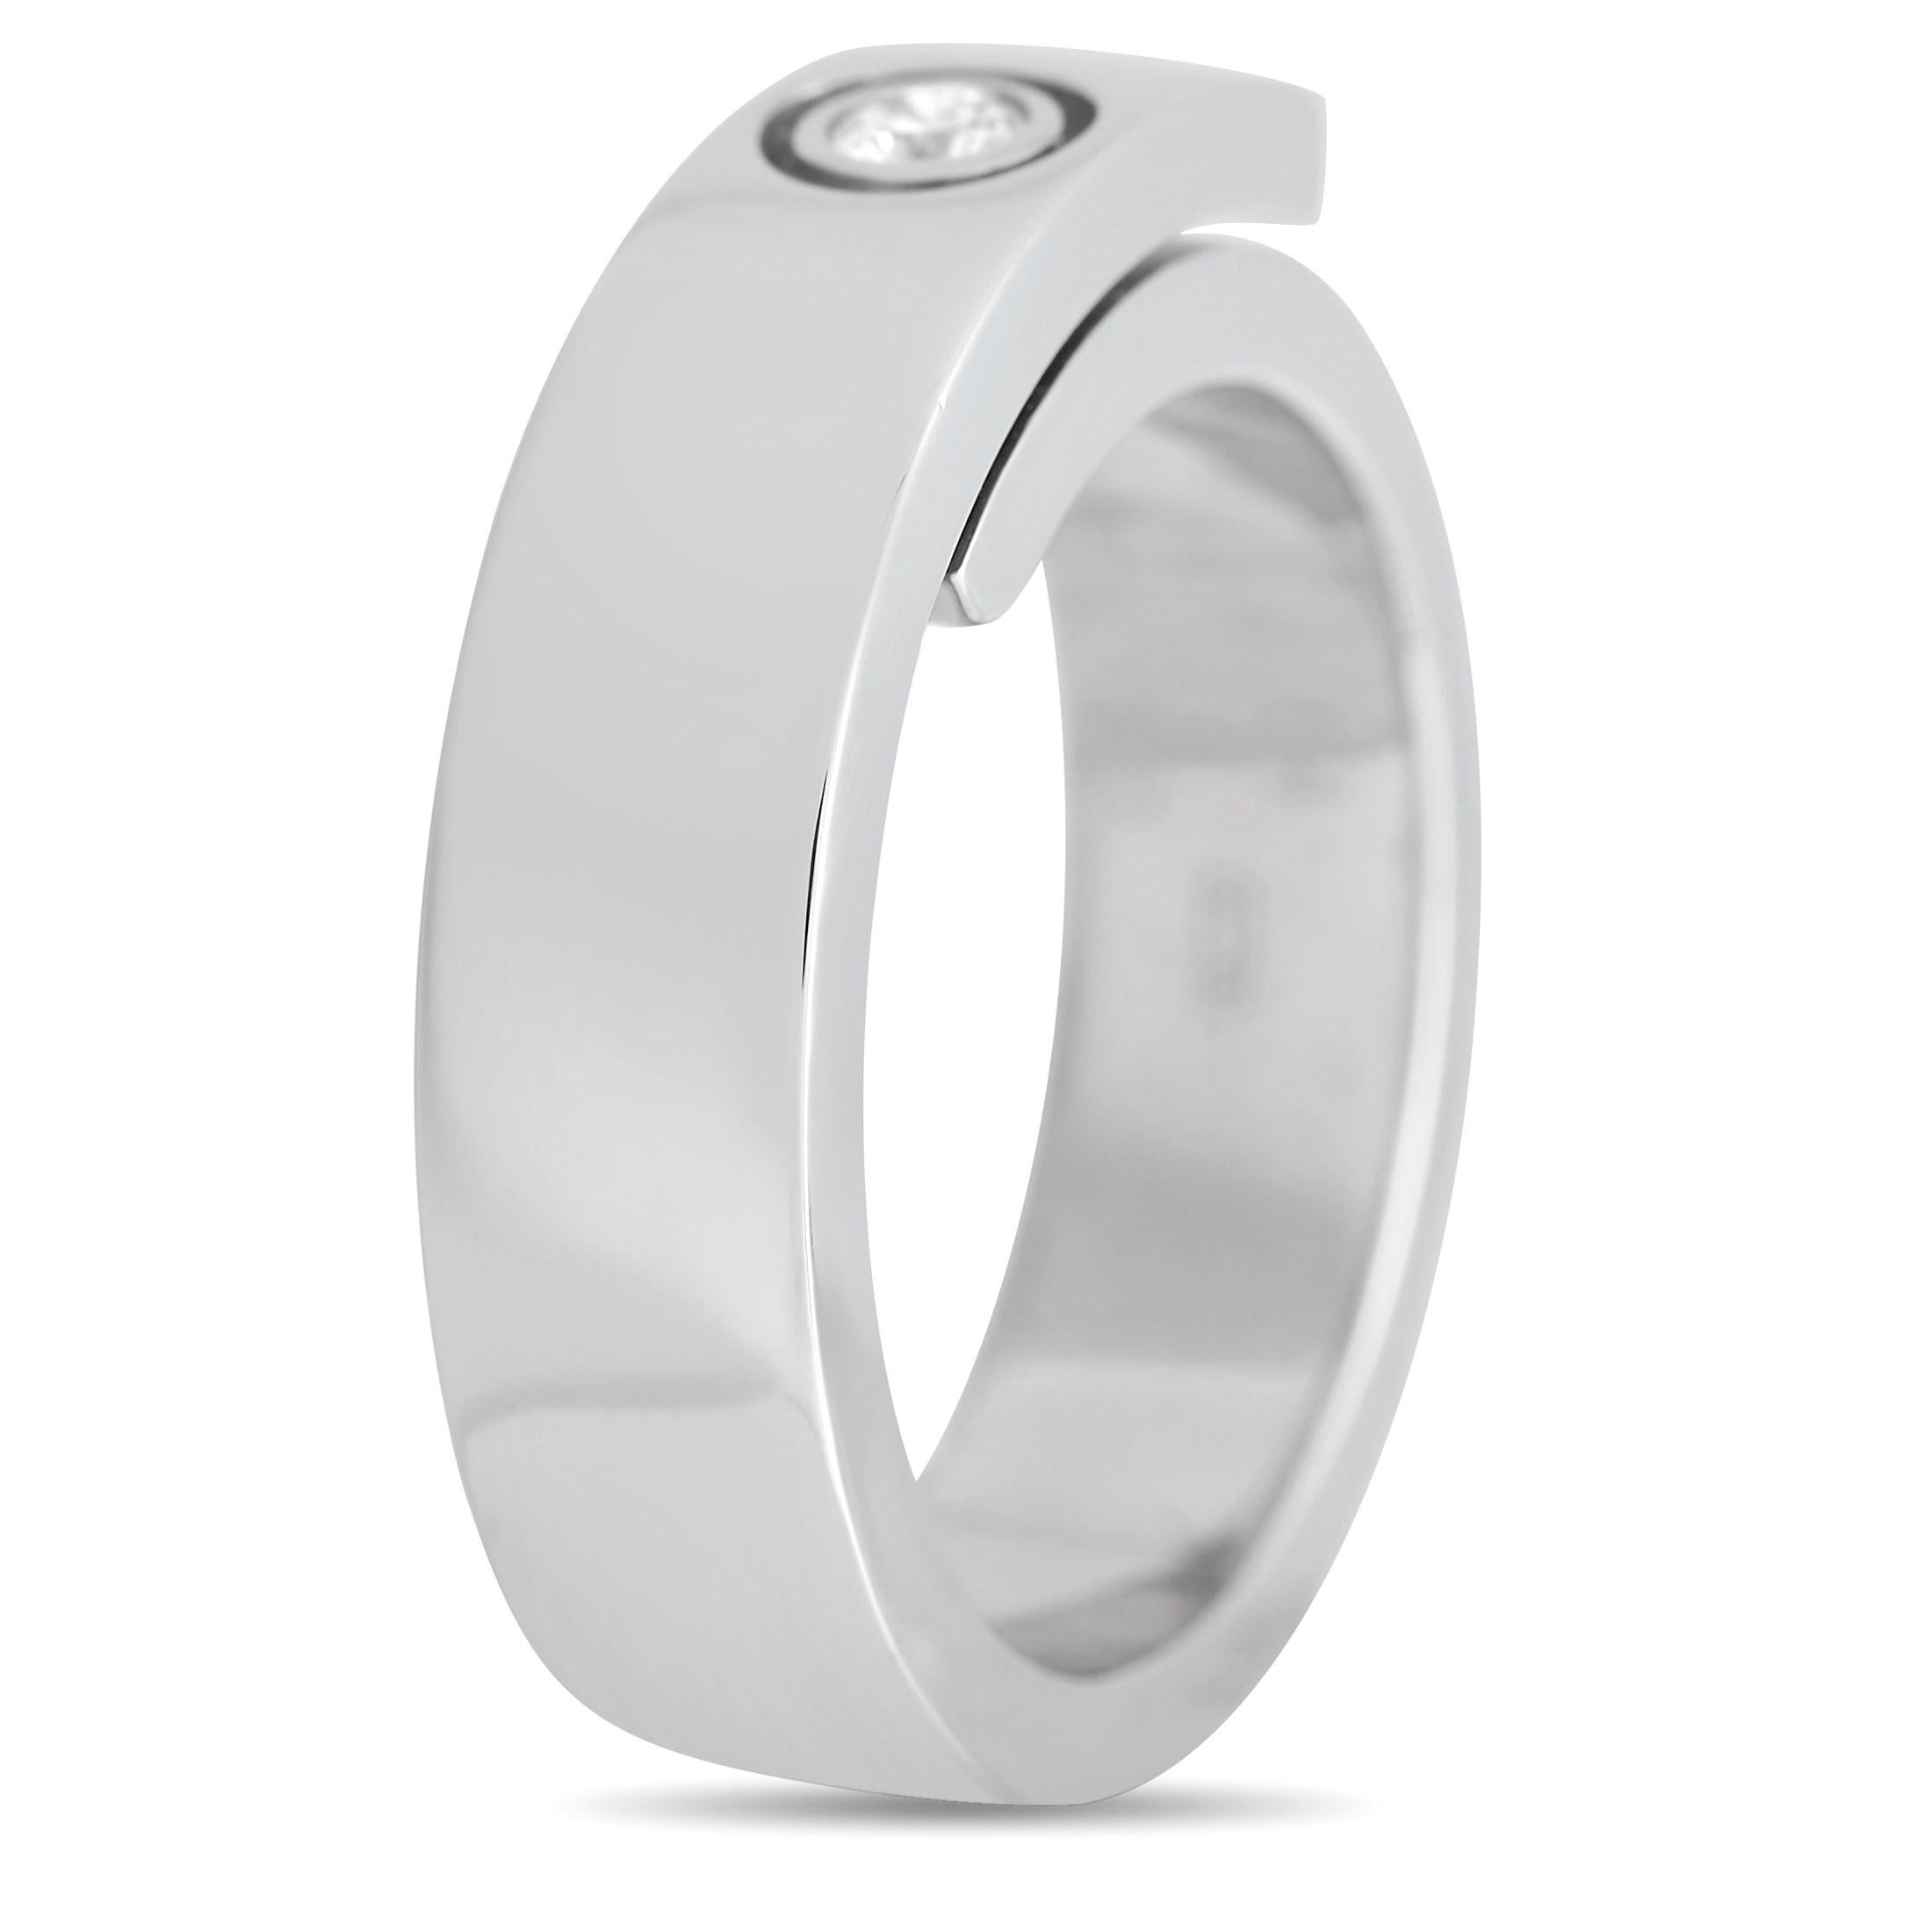 Proving that less is more is this Cartier Anniversary band. The ring is crafted in 18K white gold and features an overlapping band design. The band measures 6mm and weighs 12.8 grams. It bears a single bezel-set round brilliant-cut diamond for